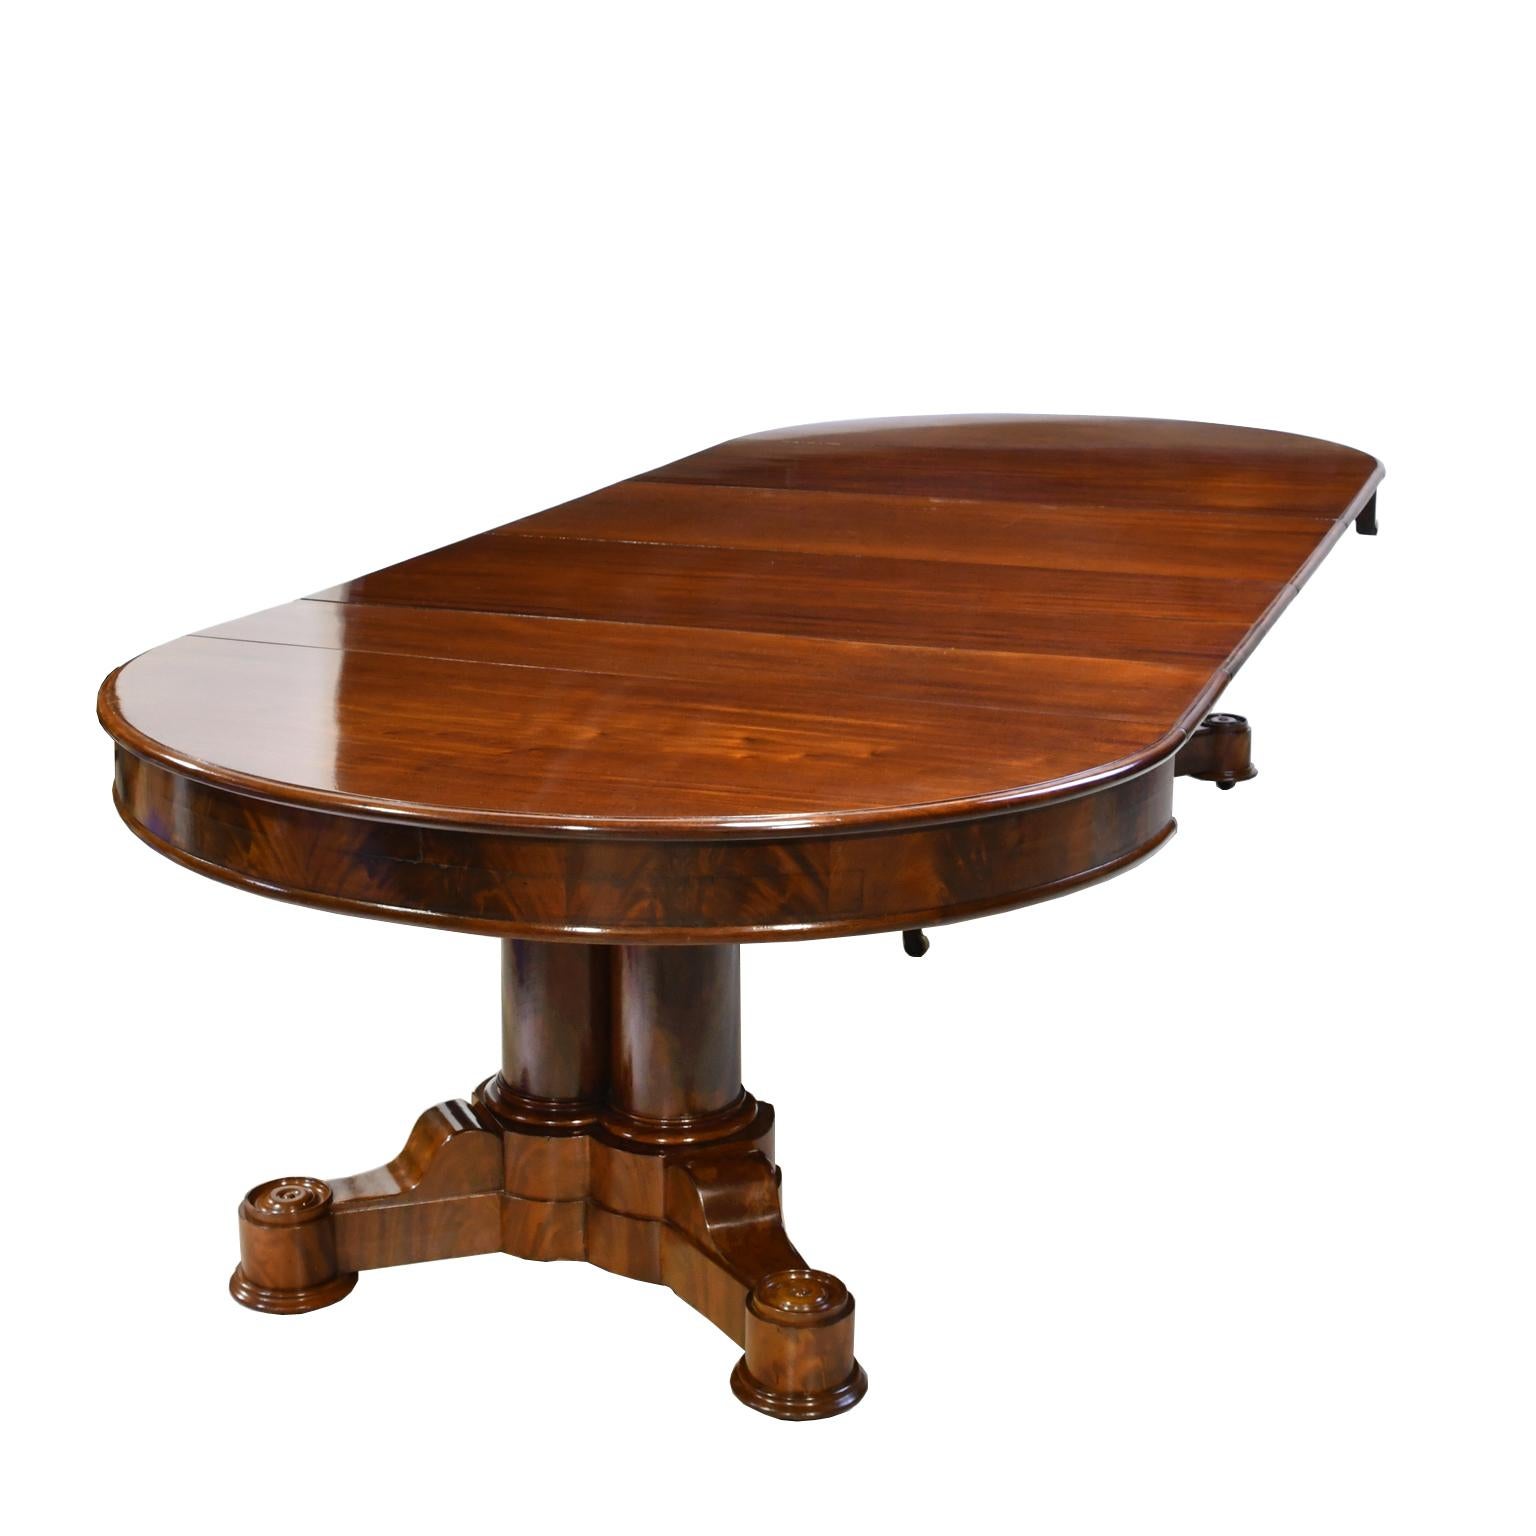 American Empire Oval Extension Dining Table in Mahogany with Pedestal Base 7